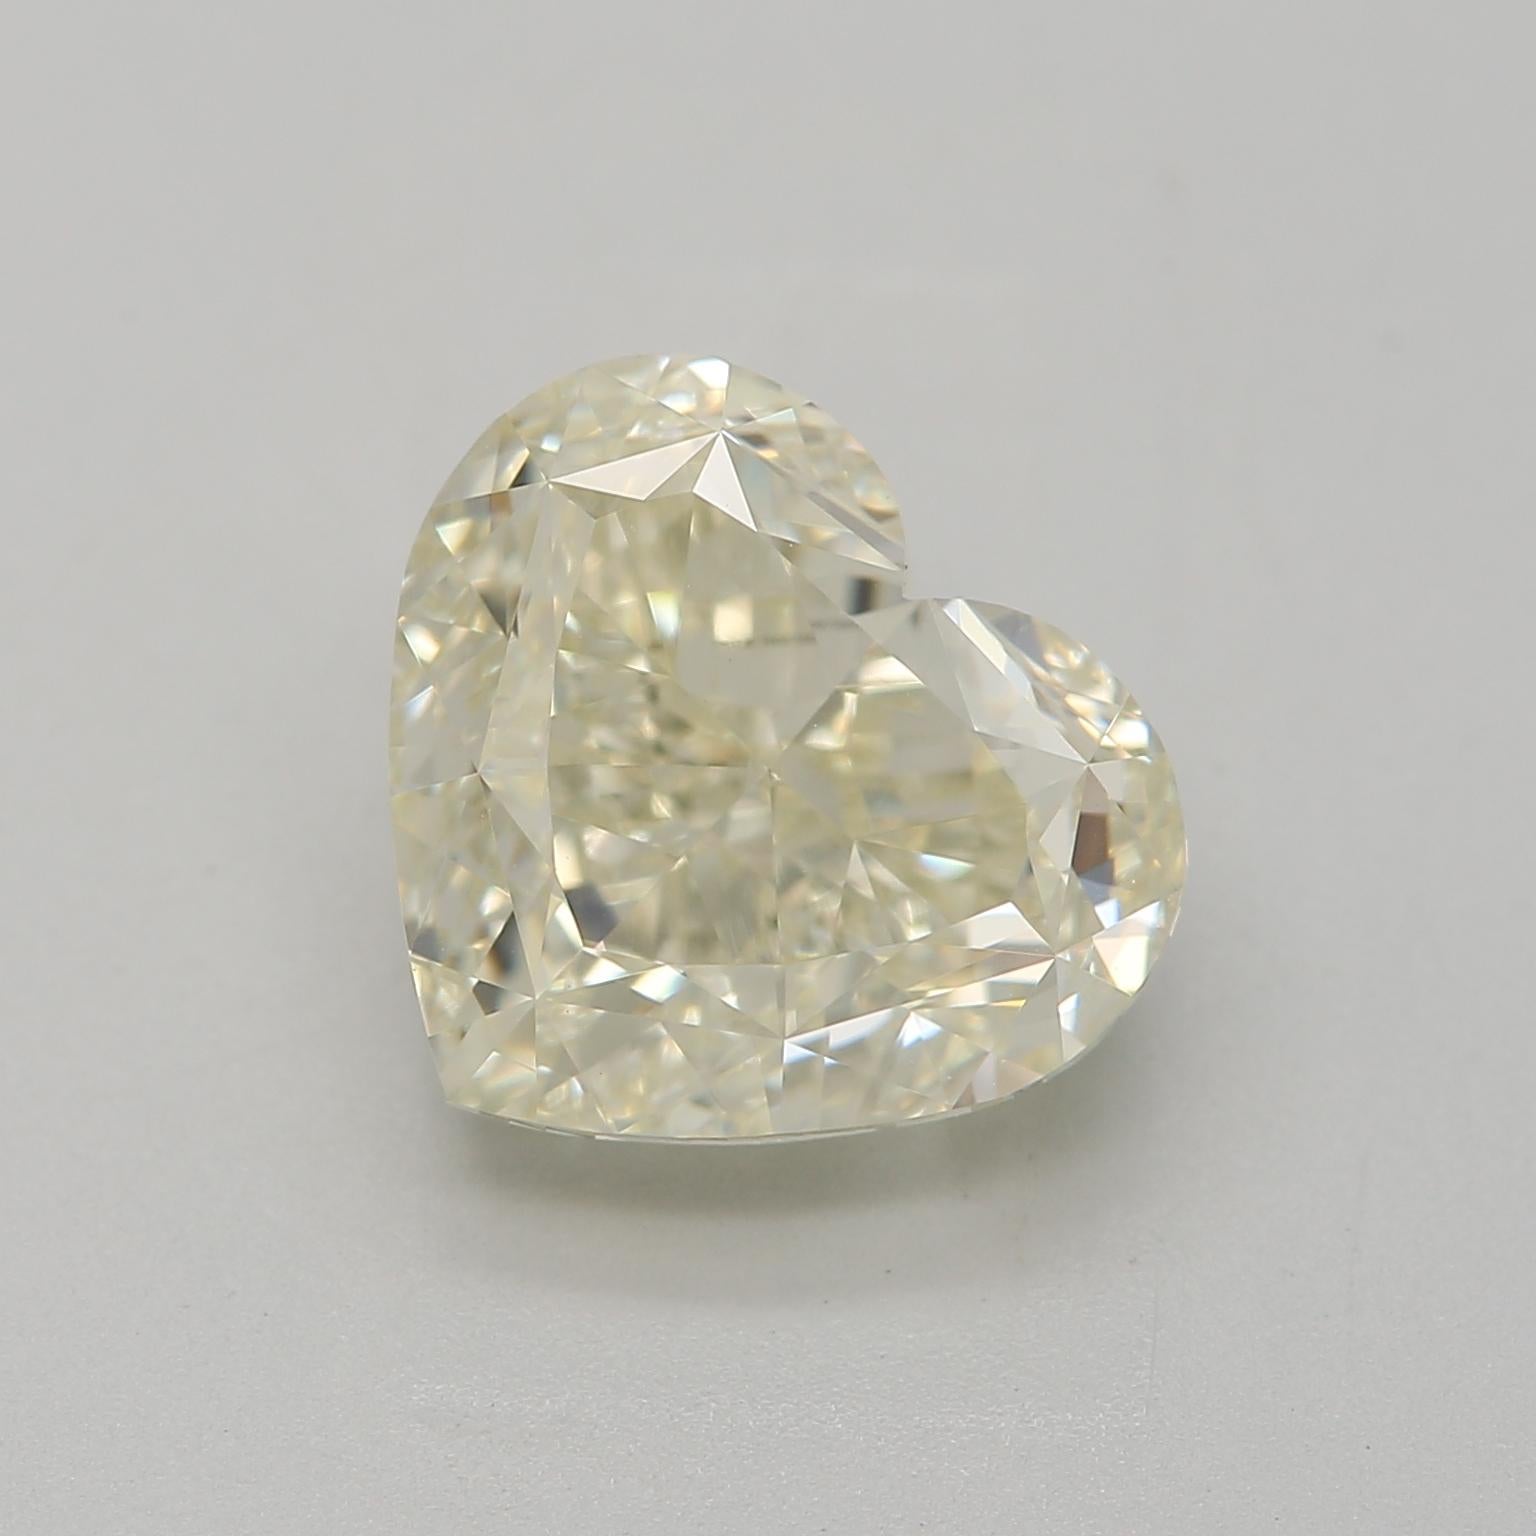 *100% NATURAL FANCY COLOUR DIAMOND*

✪ Diamond Details ✪

➛ Shape: Heart
➛ Colour Grade: S -T
➛ Carat: 3.00
➛ Clarity: VS1
➛ GIA Certified 

^FEATURES OF THE DIAMOND^

This 3-carat diamond is a substantial and valuable diamond, exhibiting impressive